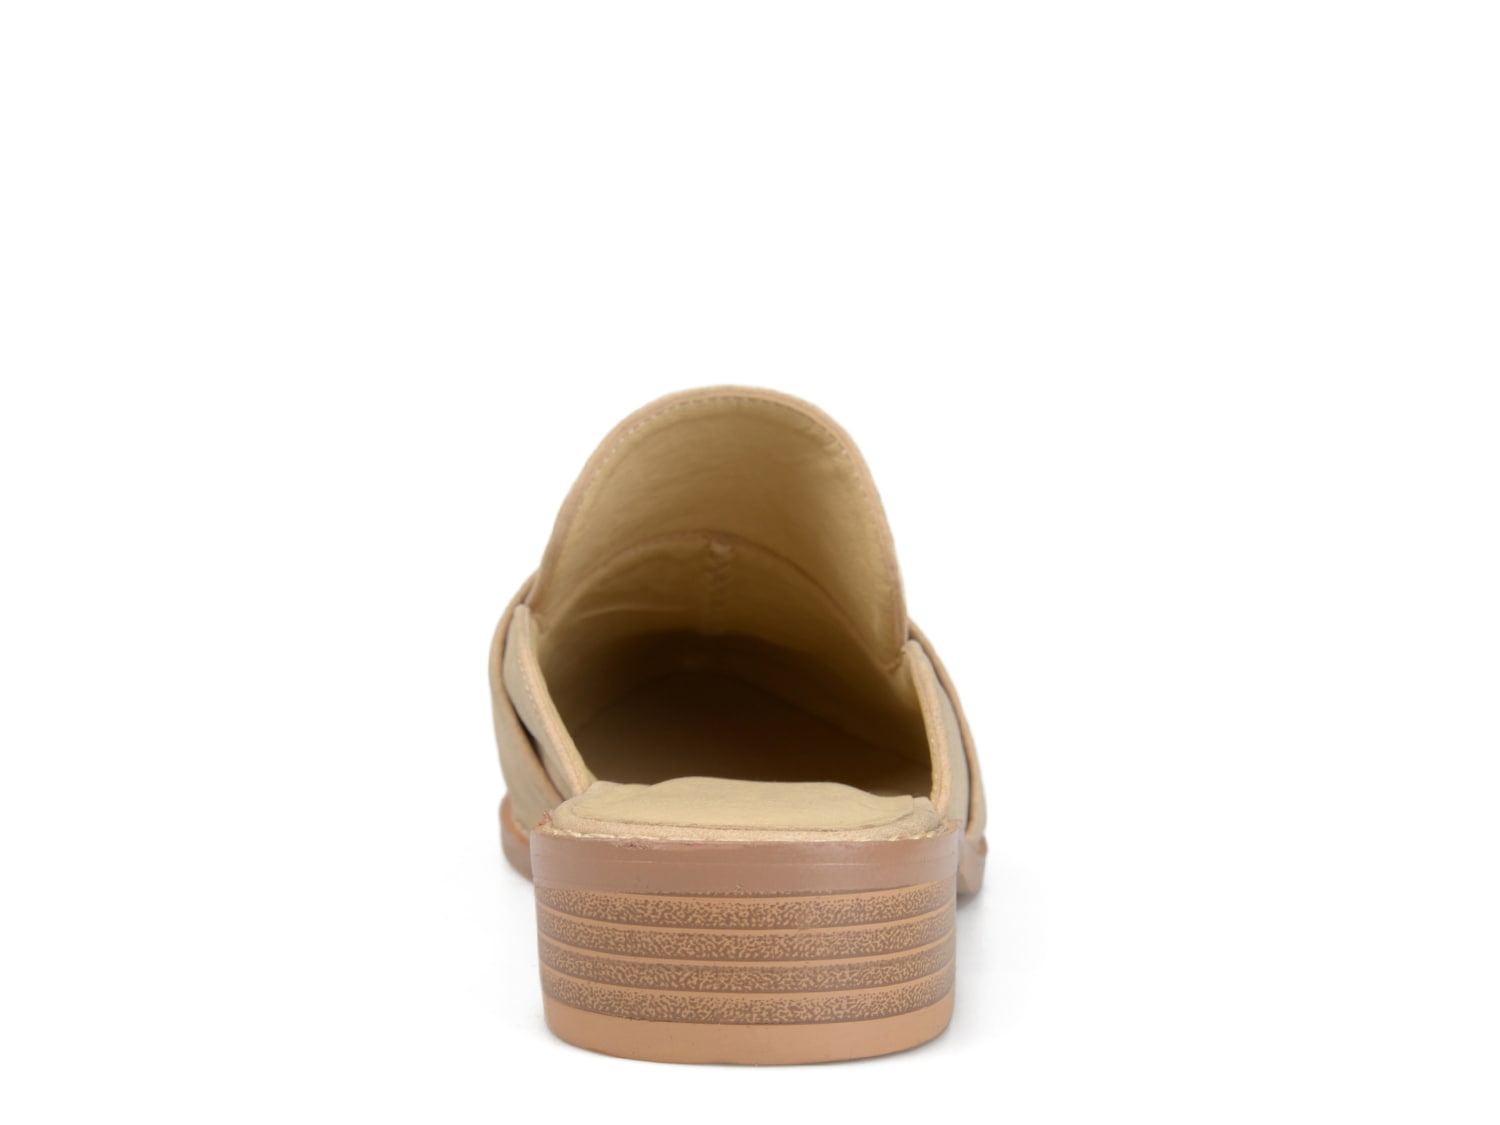 Journee Collection Keely Mule | DSW